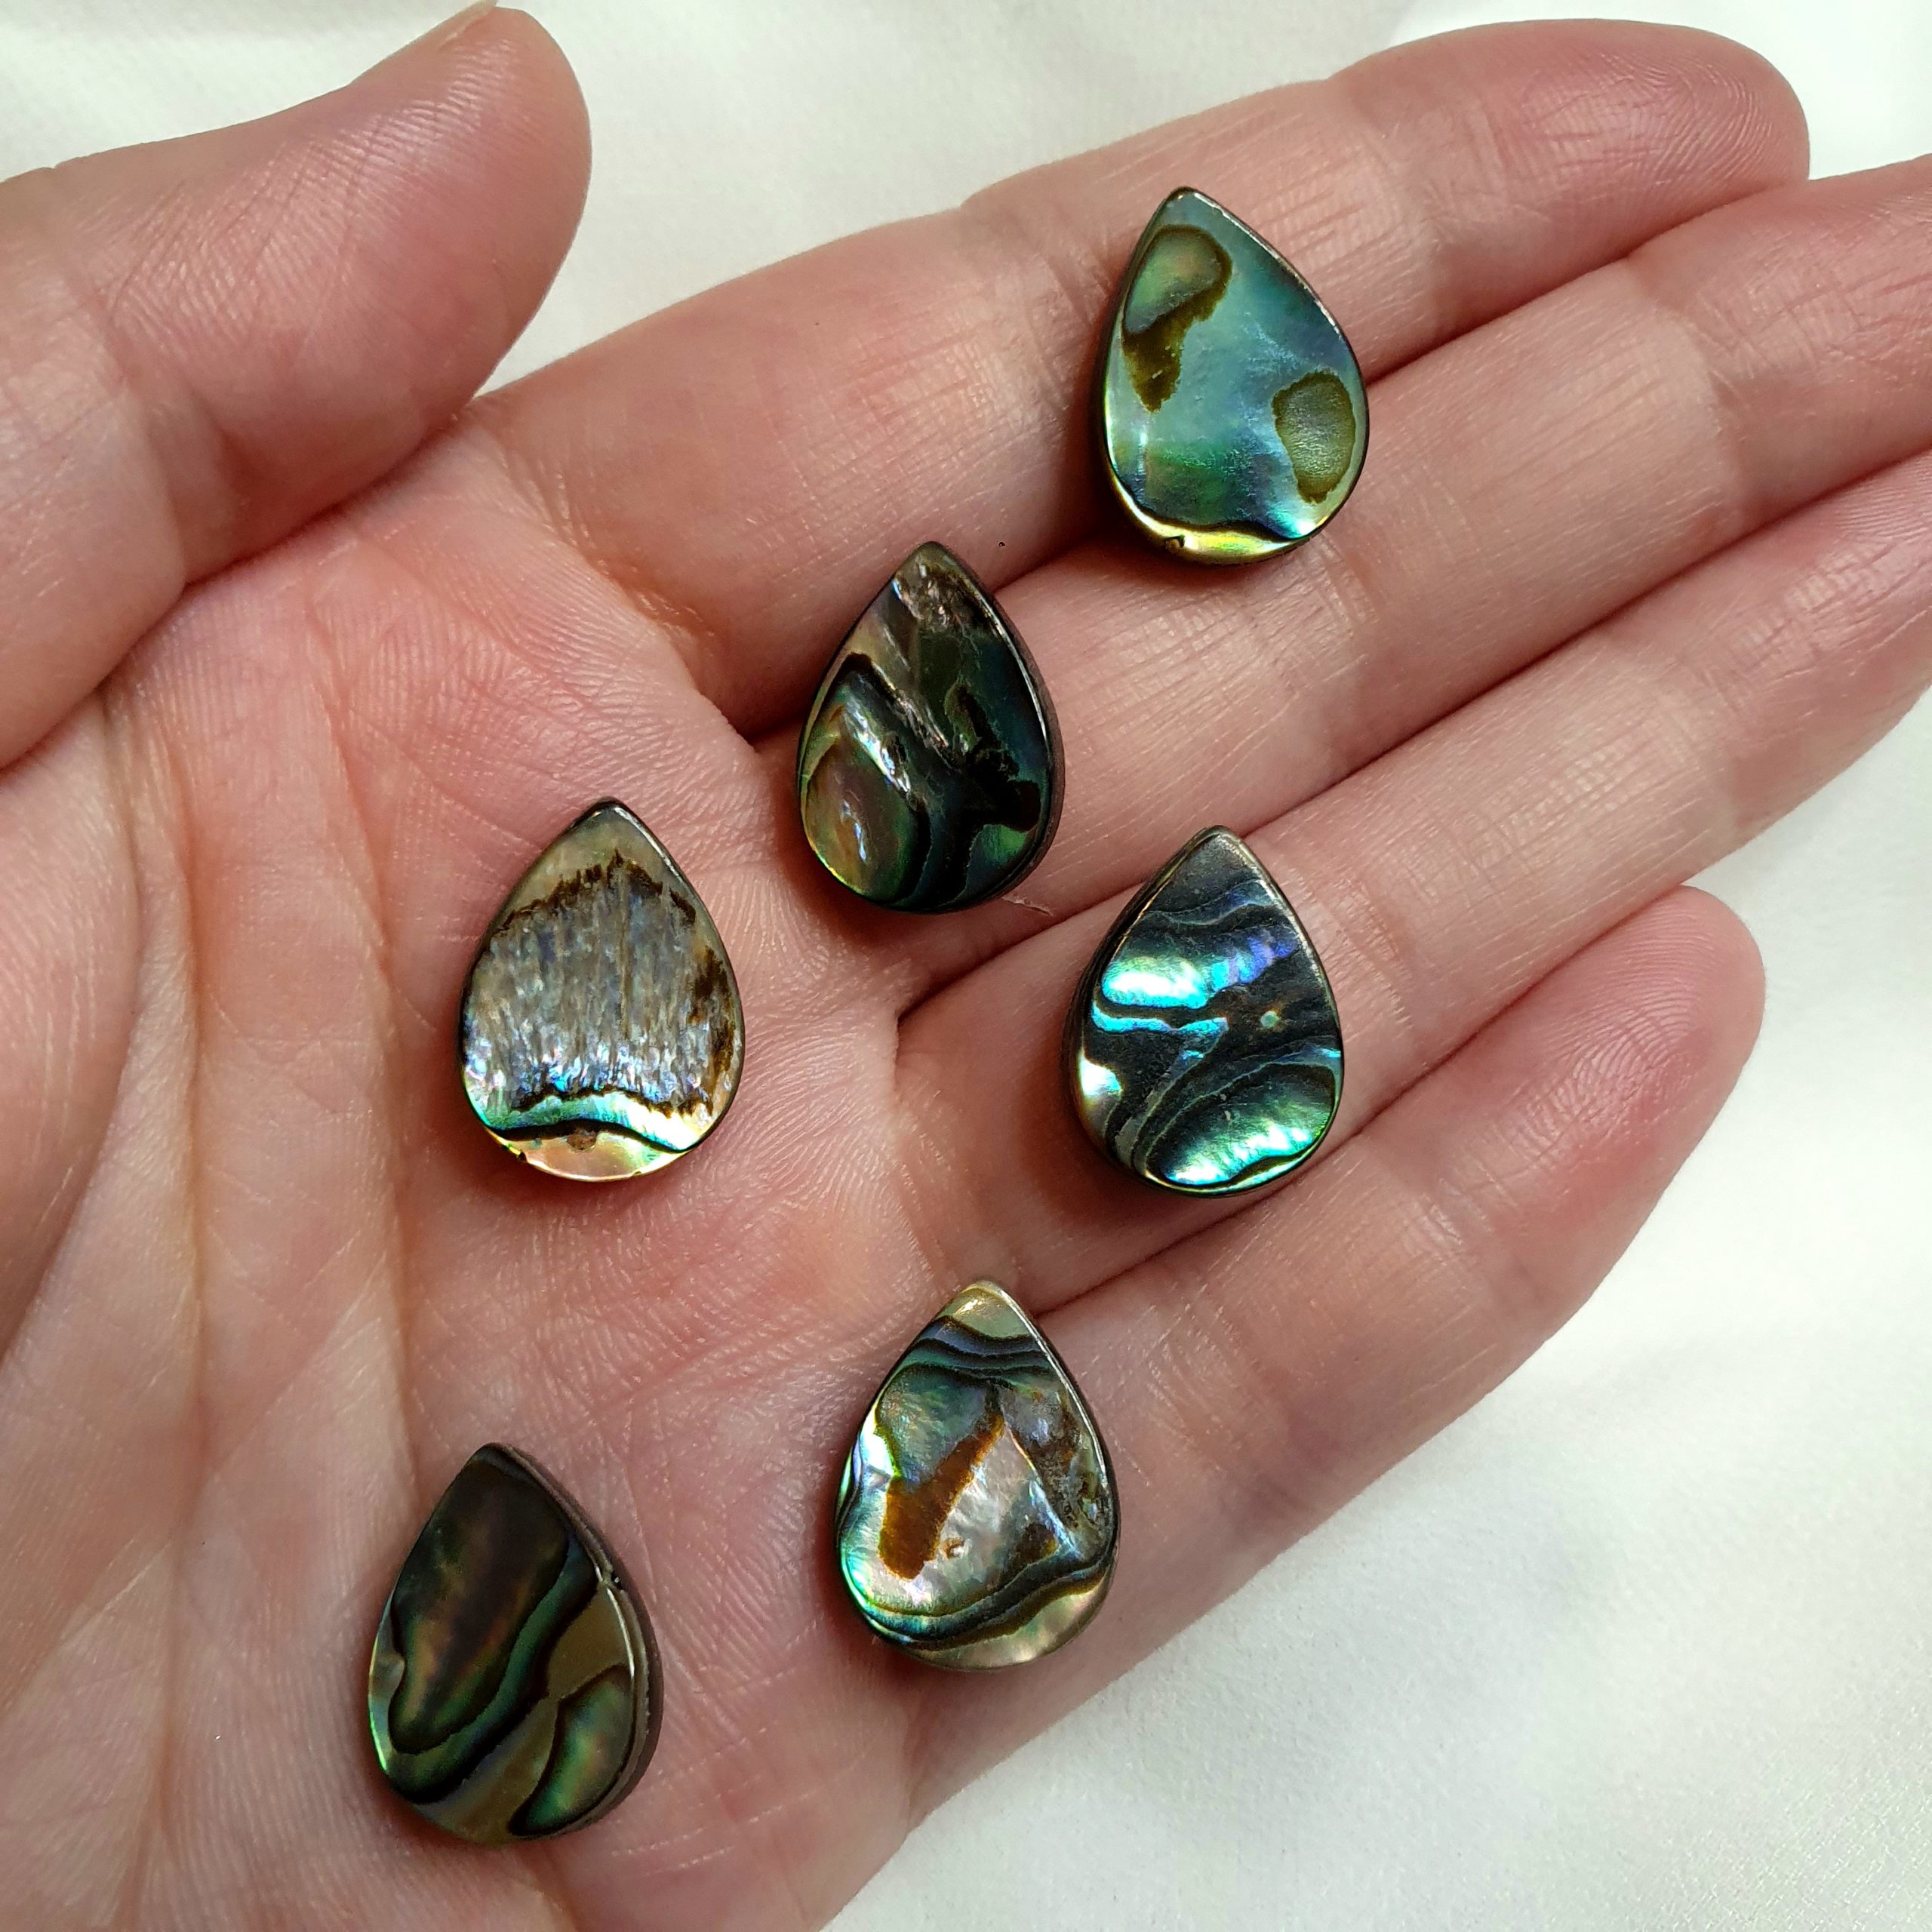 6 unique teardrop shaped abalone shell beads